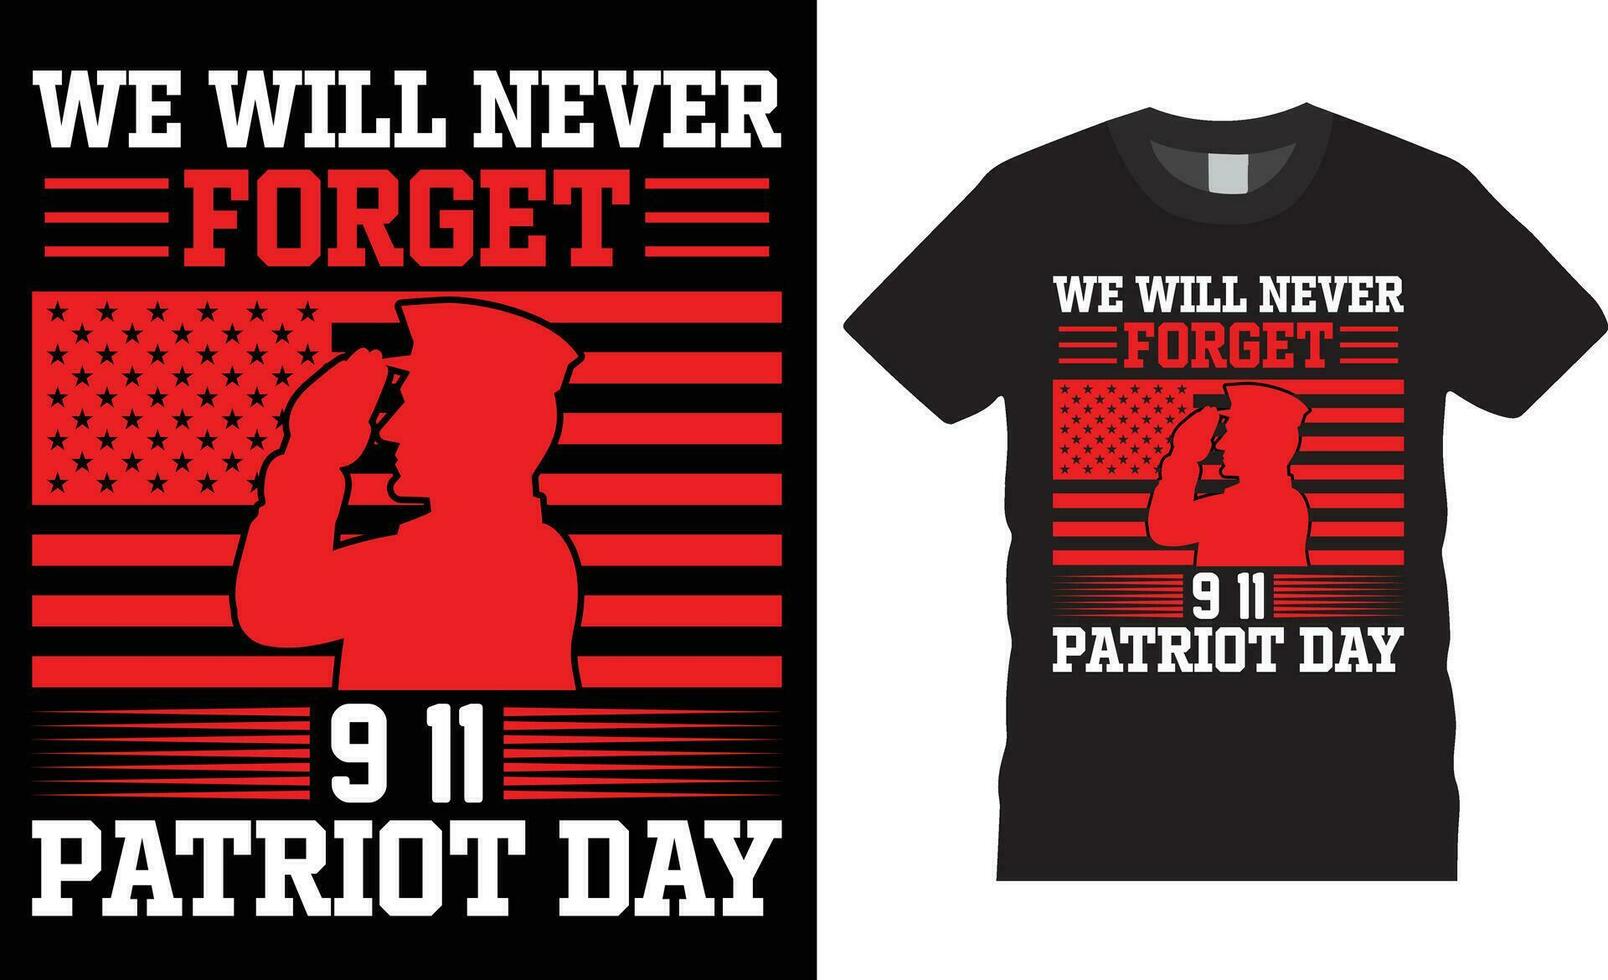 September 9.11 Patriot Day T-shirt Design vector with print template.We will never forget 9 11 patriot day